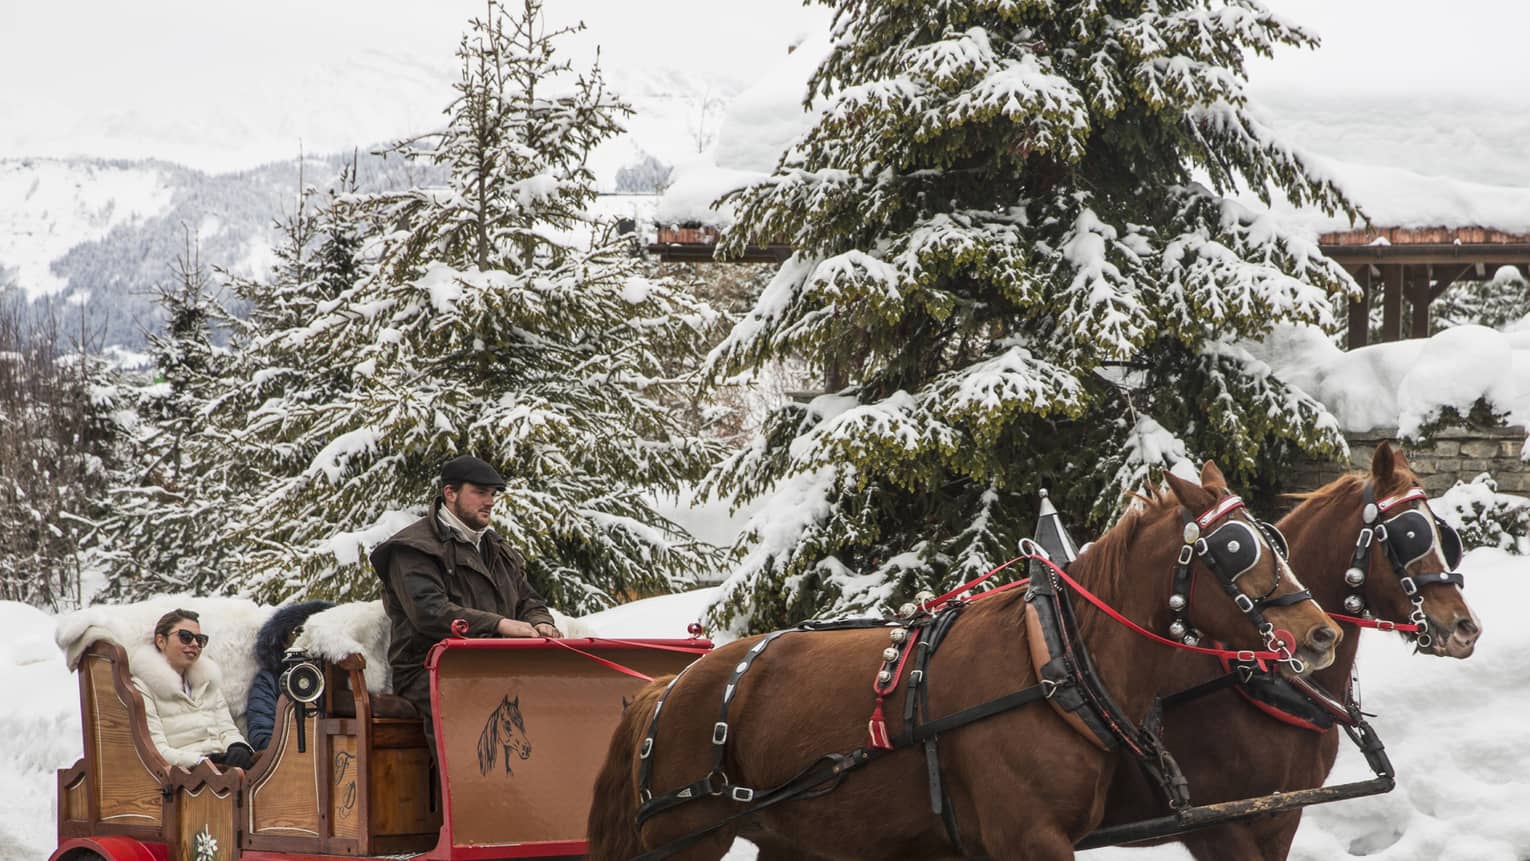 Guests explore a snow covered Megeve in a horse drawn carriage